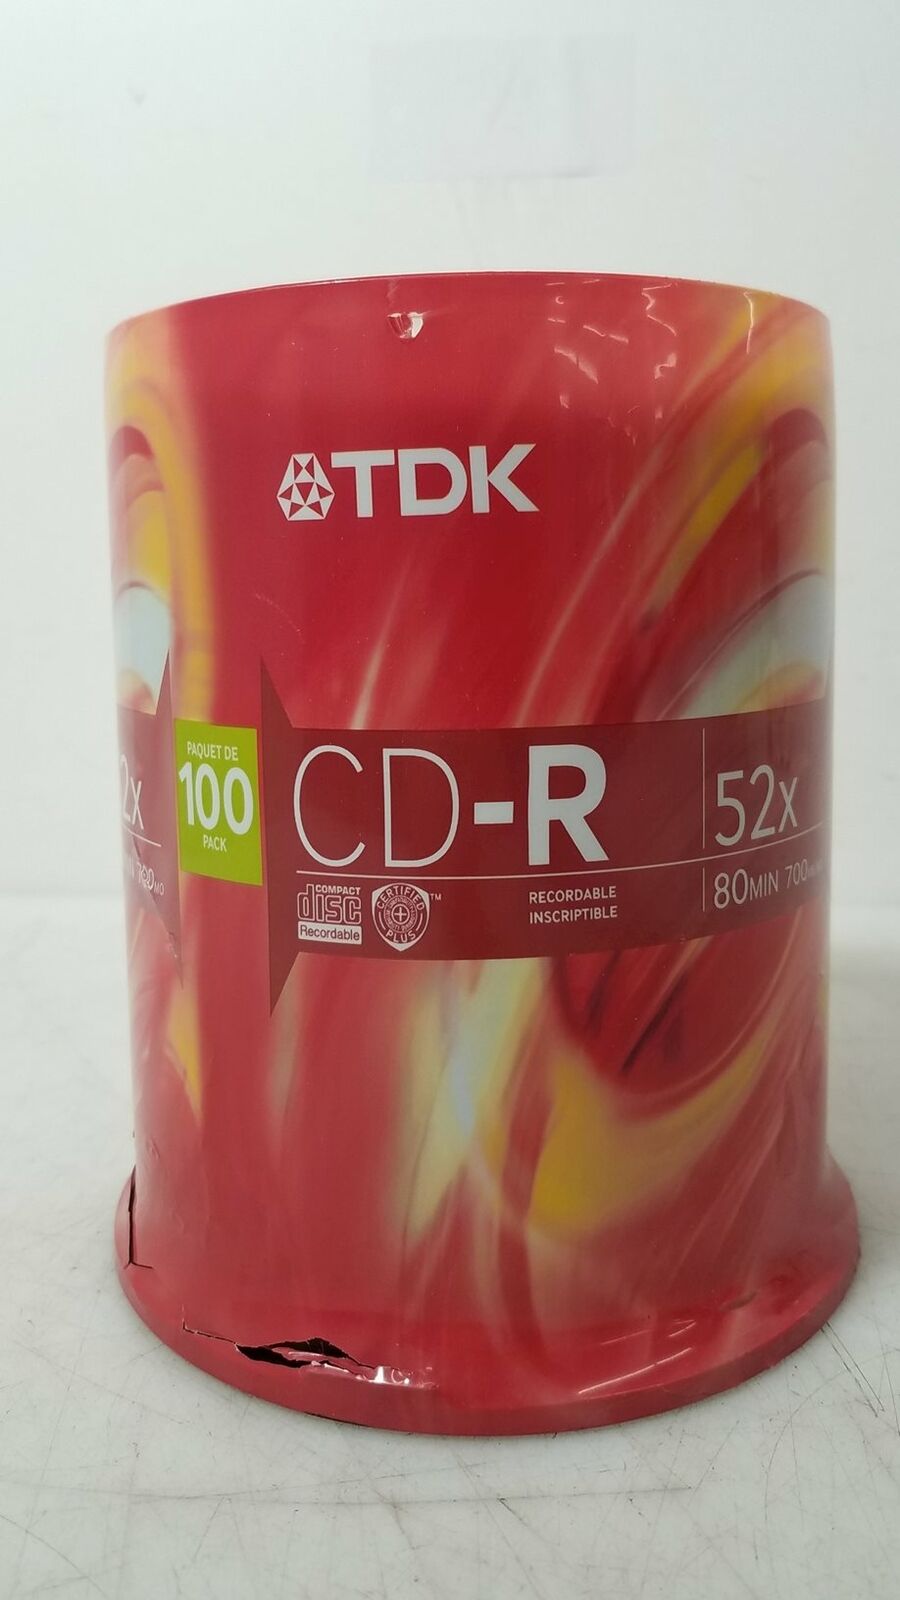 Tdk Cd-r 52x 80min 700mb/mo 100 Count Sealed